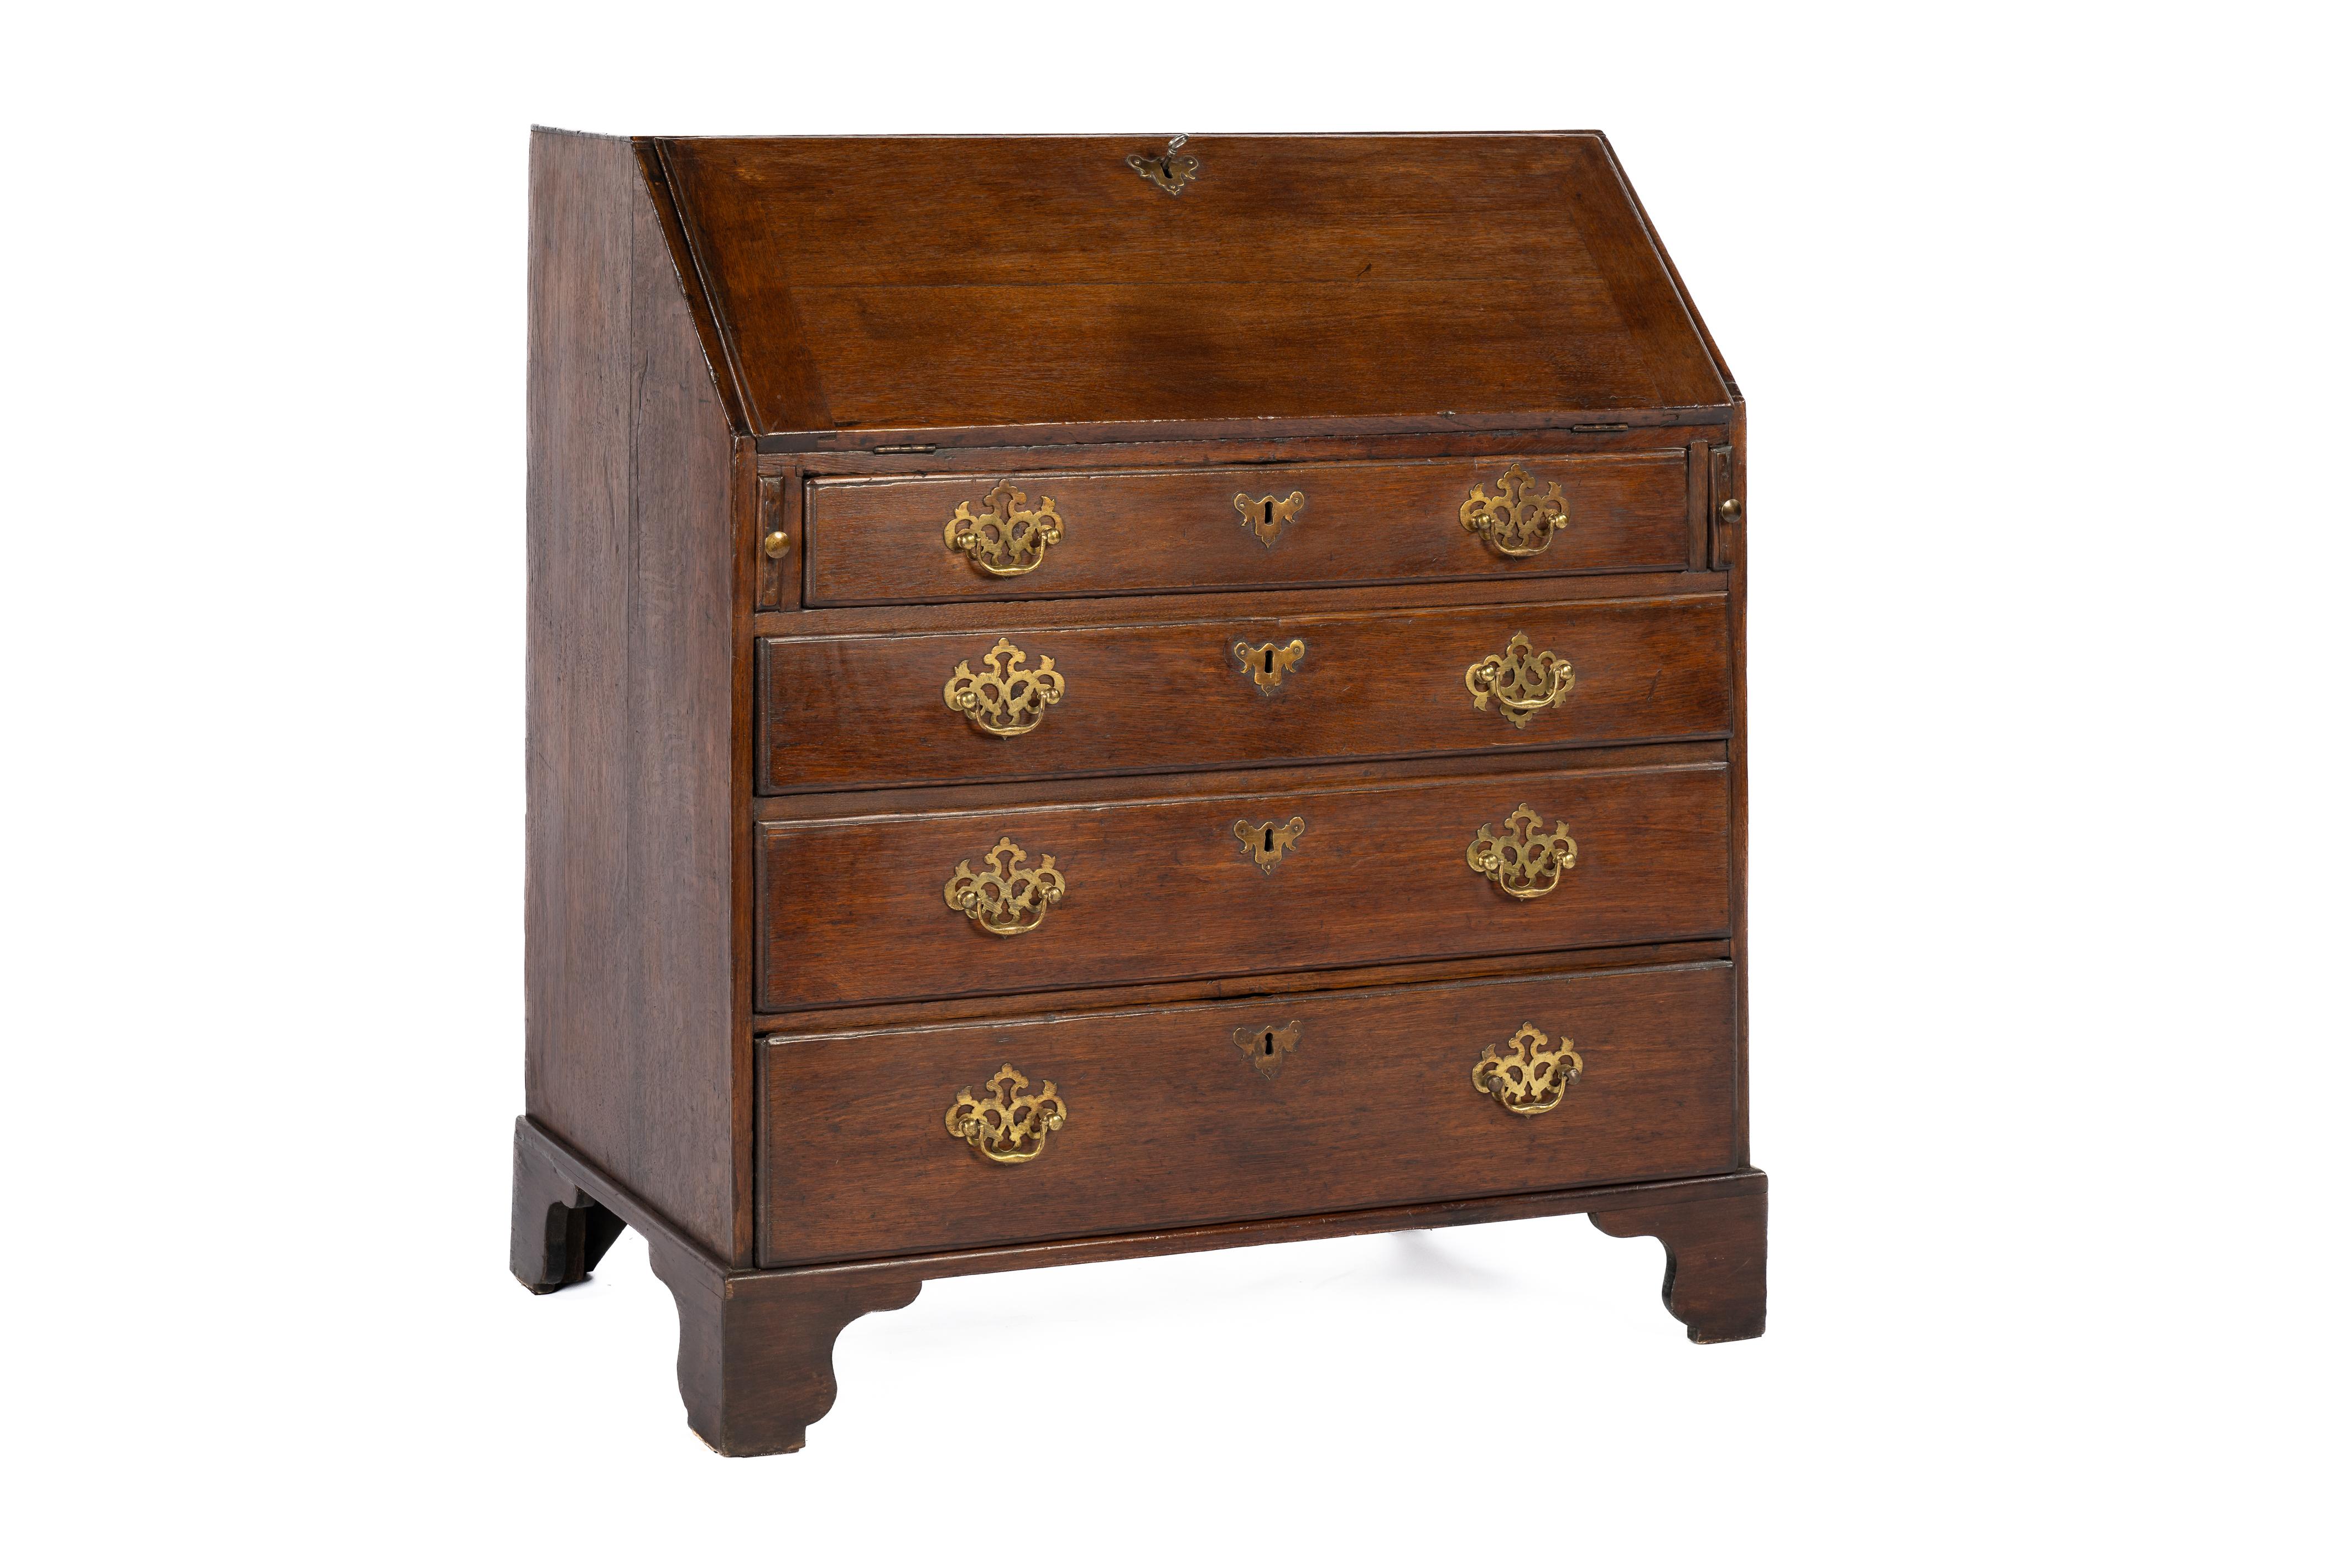 On offer here is a beautiful Queen Anne slant front desk was made in England in the late 18th century. It was completely made in the finest quality European oak, including the drawers interiors. It stands on bracket feet with four drawers fitted